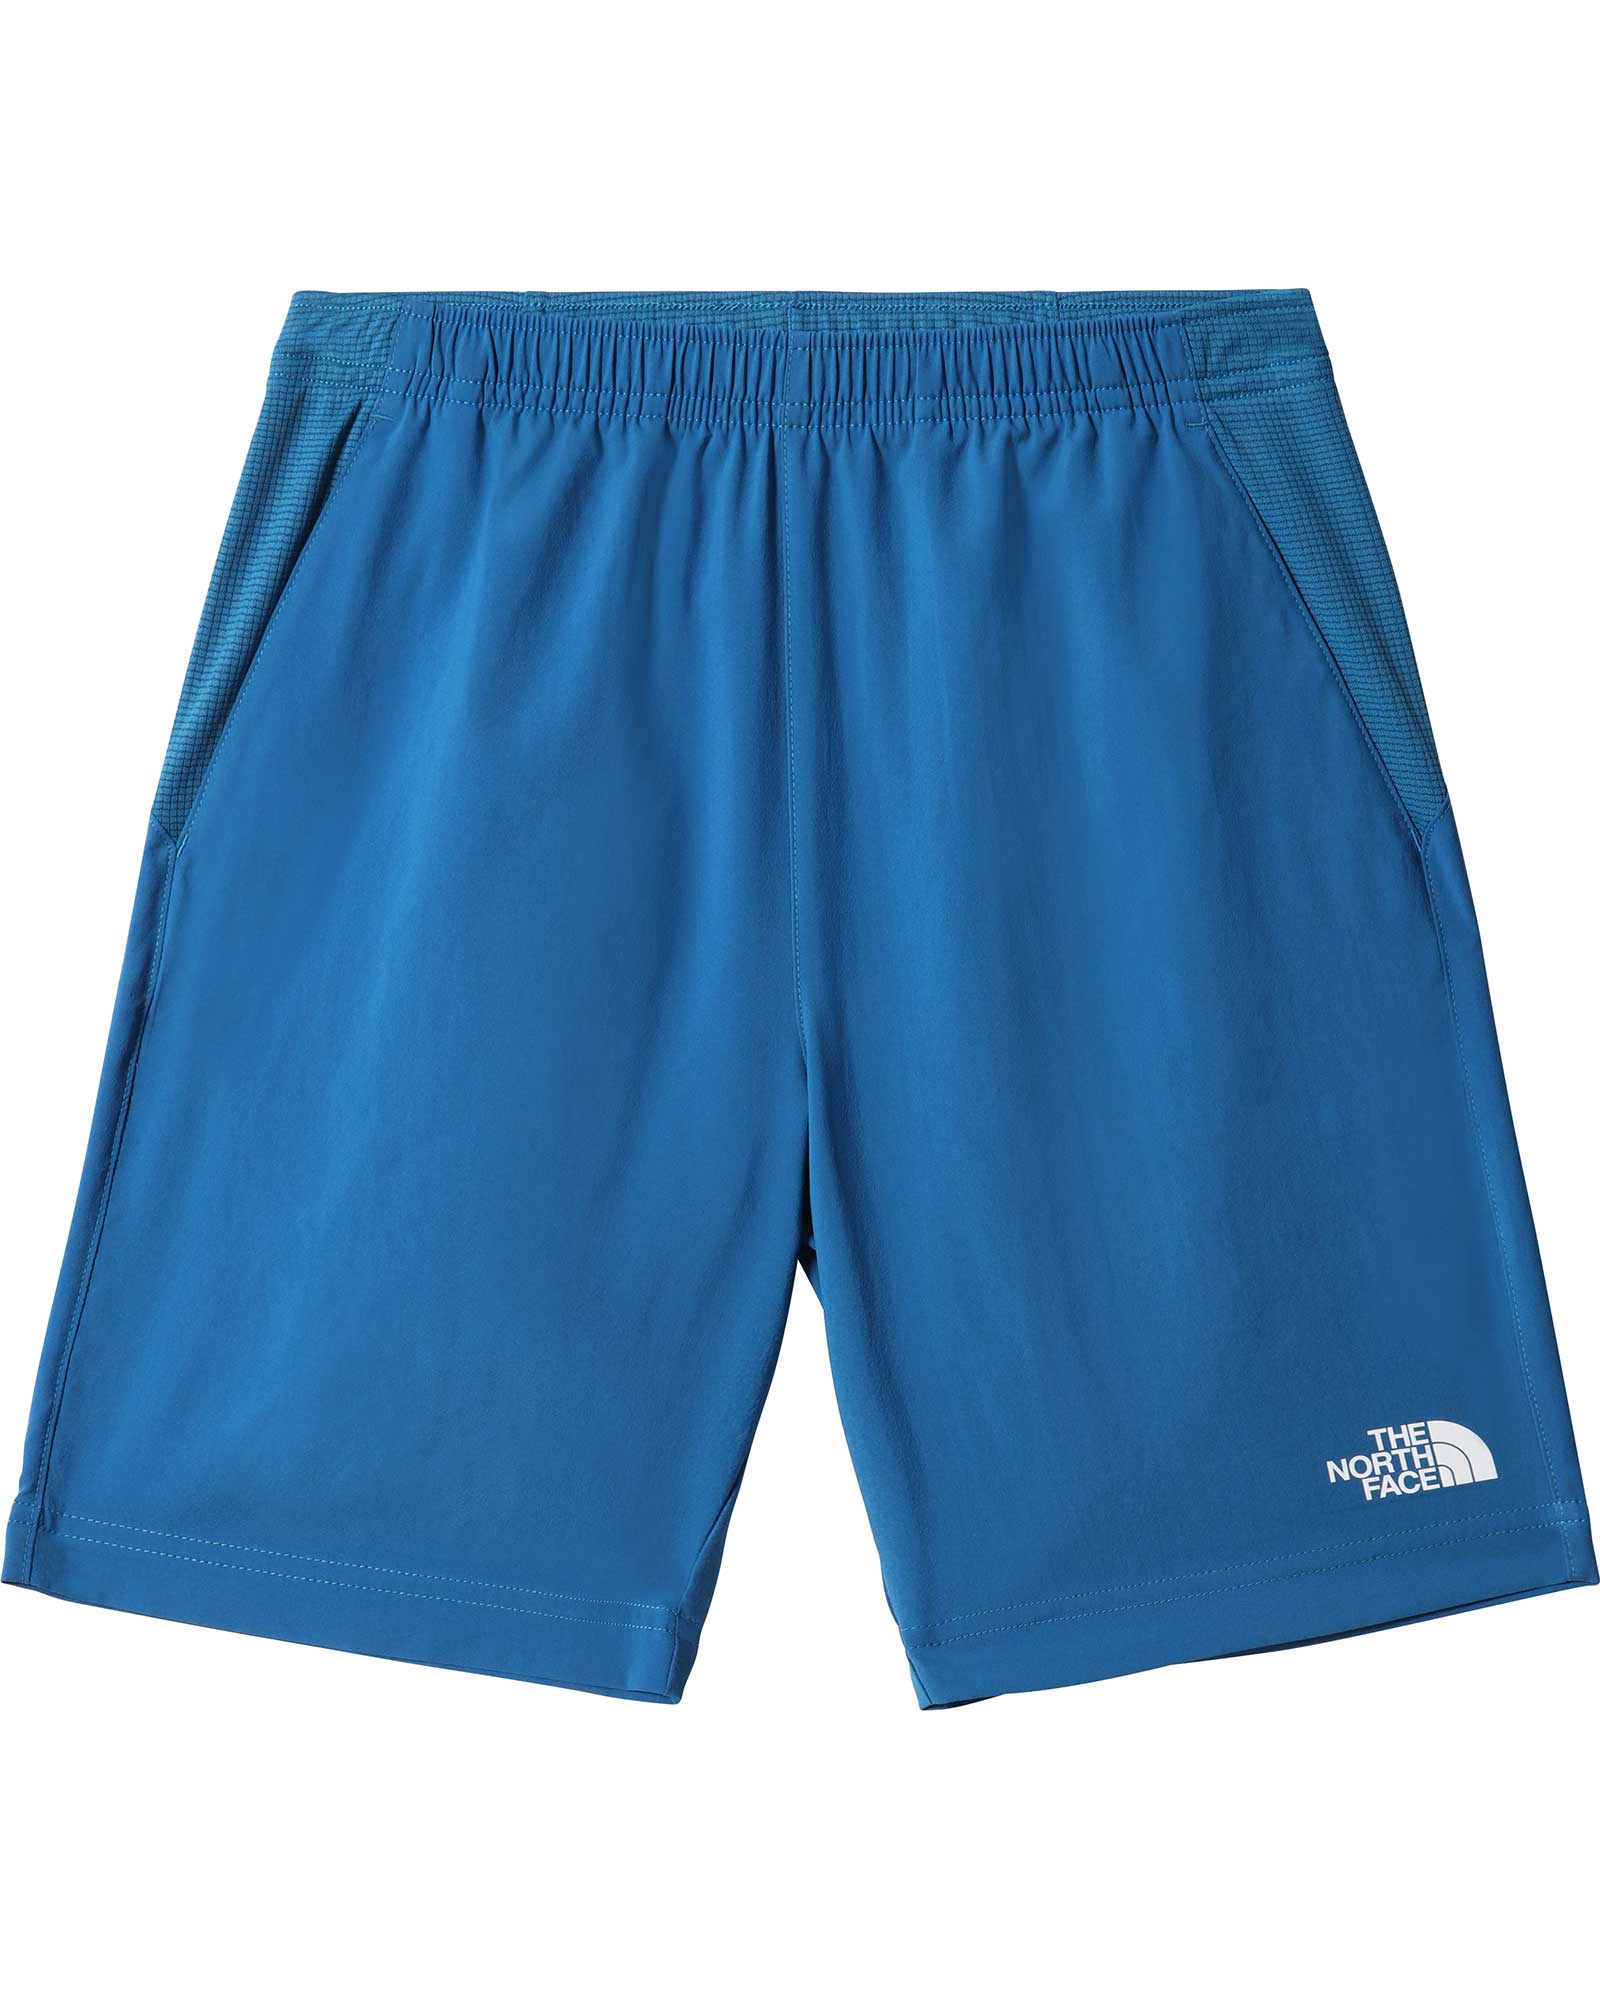 Product image of The North Face Reactor Boys' Shorts